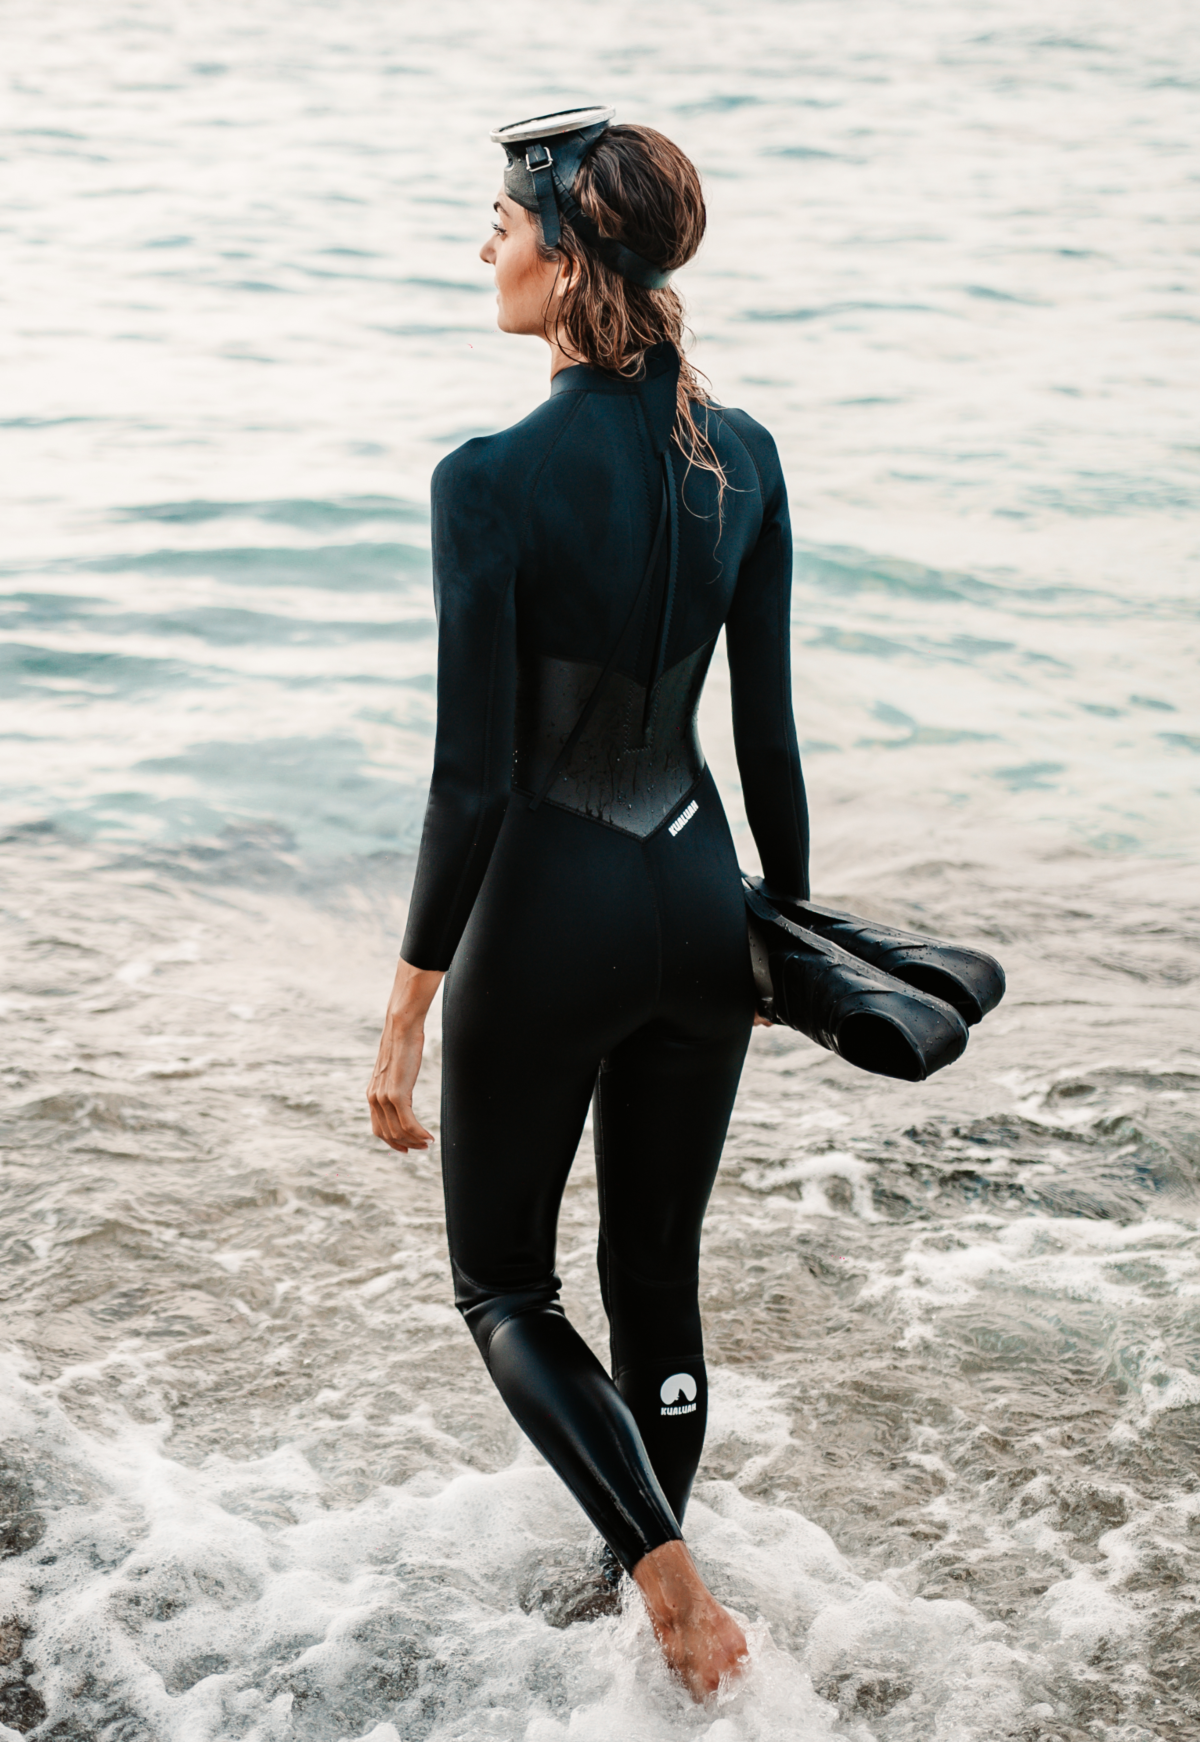 Discover our oceans in the Kualuah Aria wetsuit. Chic, comfortable and eco friendly wetsuit made of 2 mm bioprene.